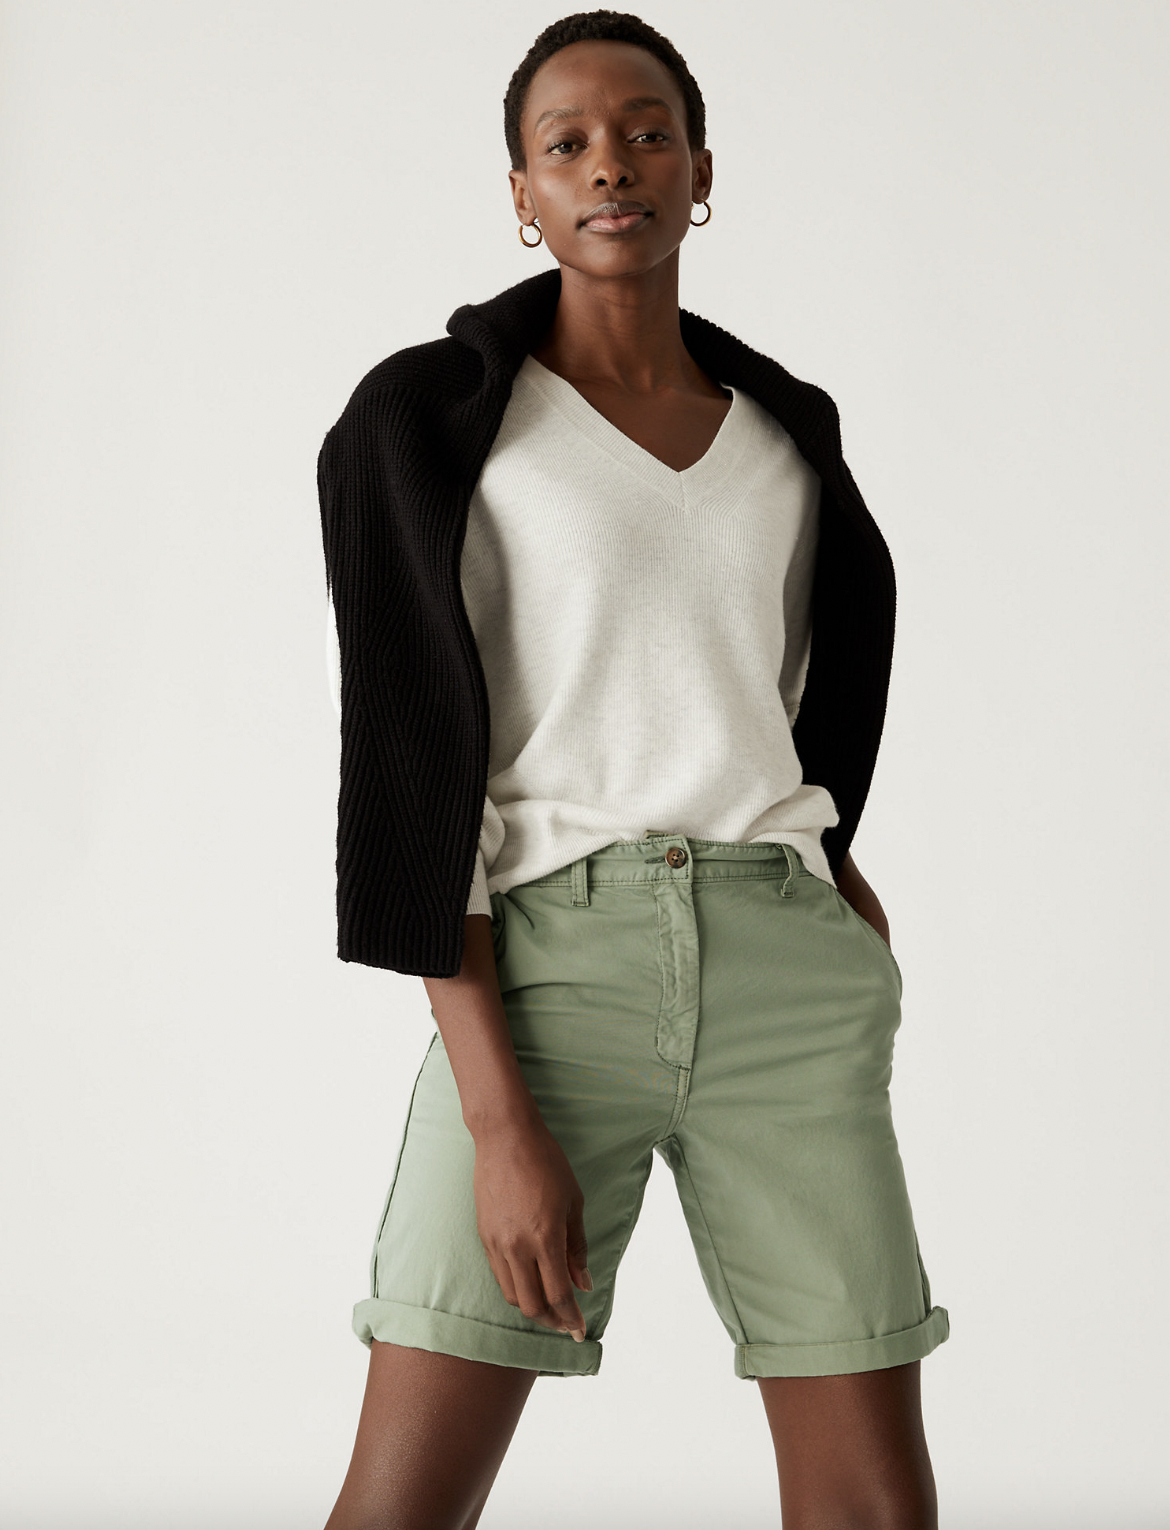 The cotton-rich shorts also have 3% elastane so they'll give a little and won't dig in uncomfortably. (Marks & Spencer)